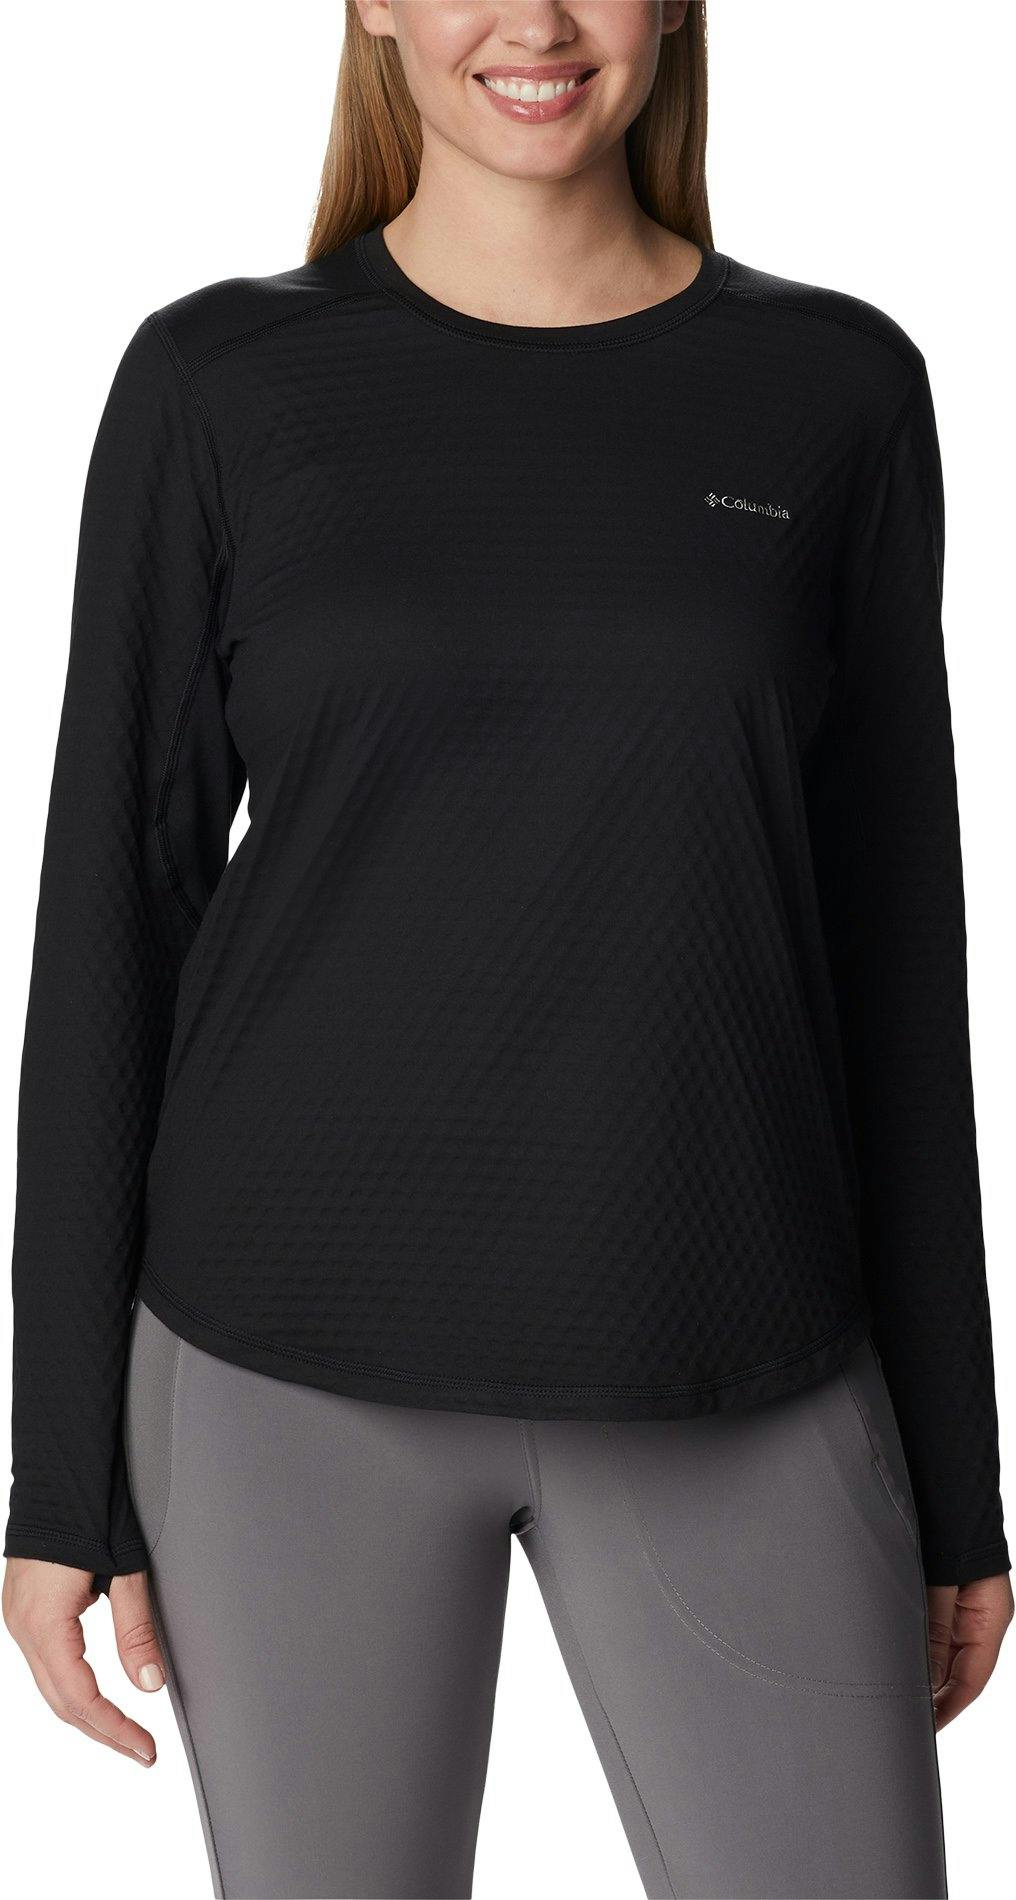 Product image for Bliss Ascent Long Sleeve Technical T-Shirt - Women's